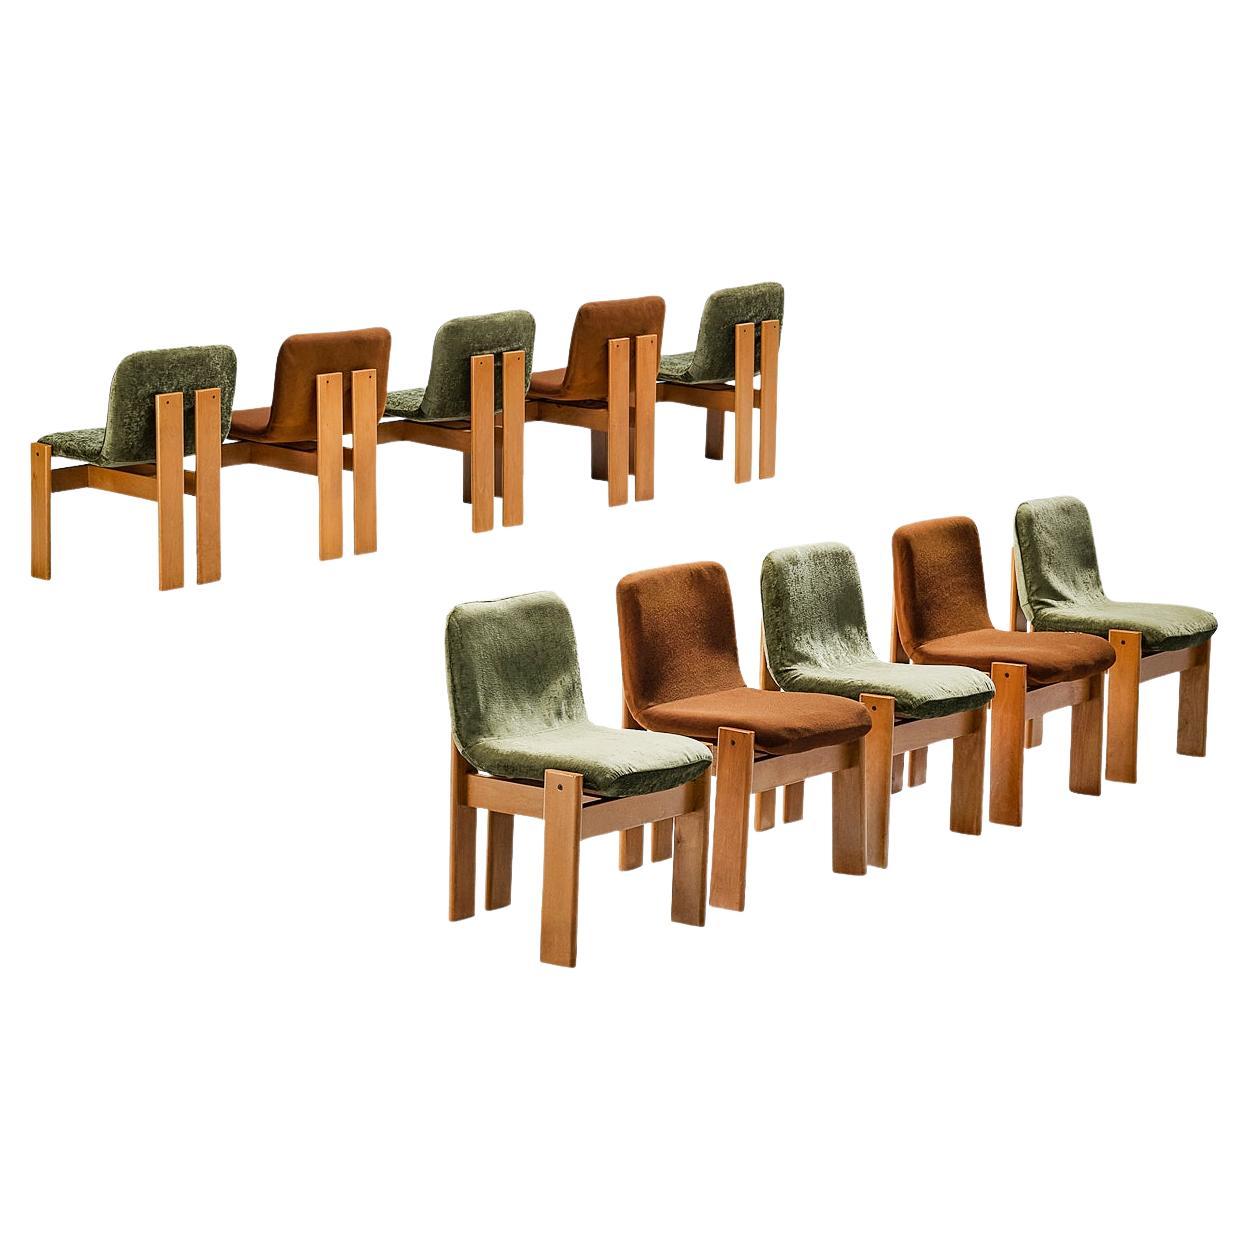 Set of Ten Italian Dining Chairs in Brown and Olive Green Upholstery